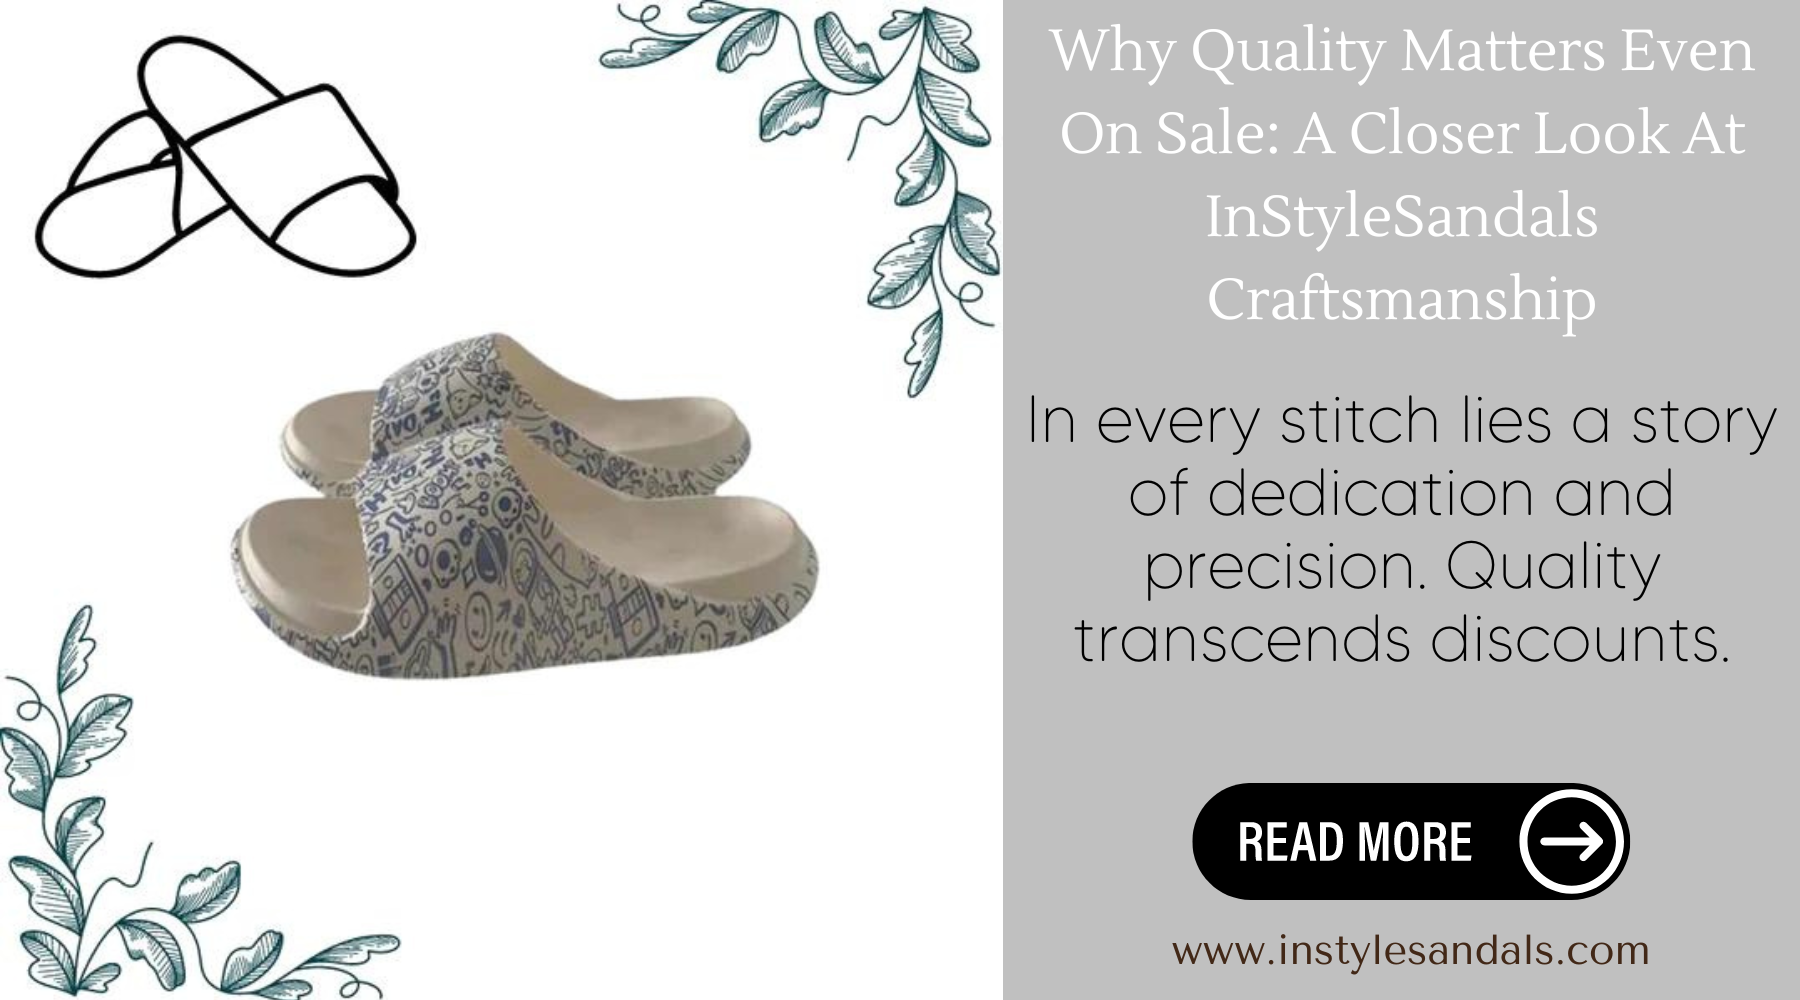 Why Quality Matters Even On Sale: A Closer Look At InStyleSandals Craftsmanship